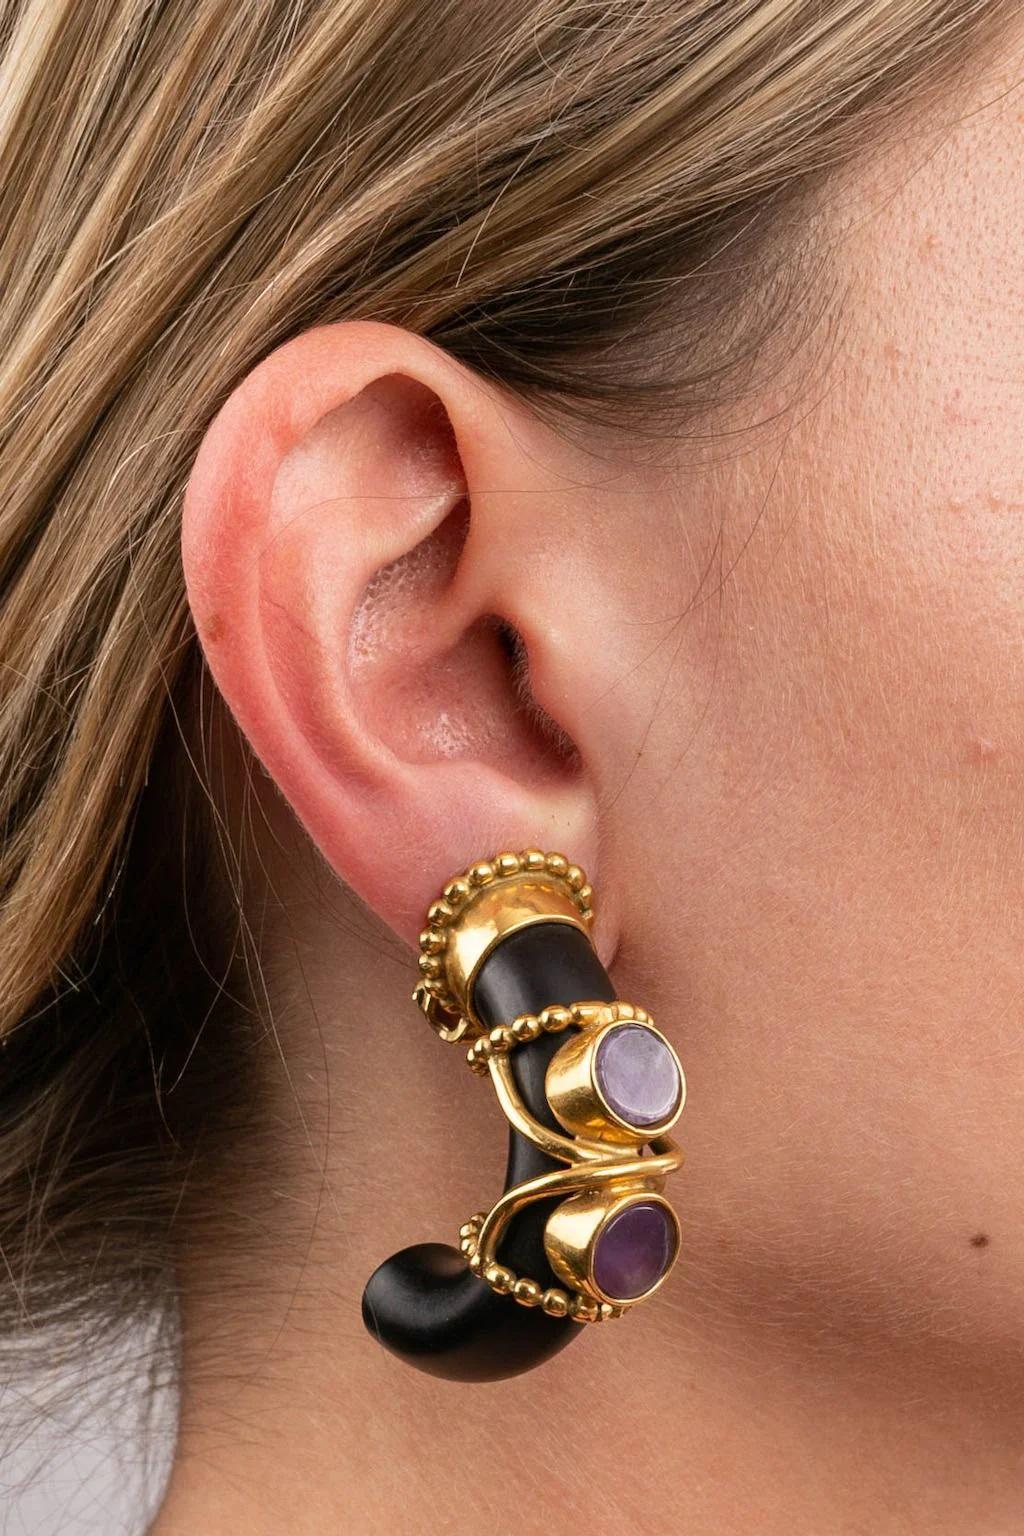 Gilted metal clip-on earrings with wood and cabochons in a amethyst color.

Additional information:
Dimensions: 5 cm (1.97